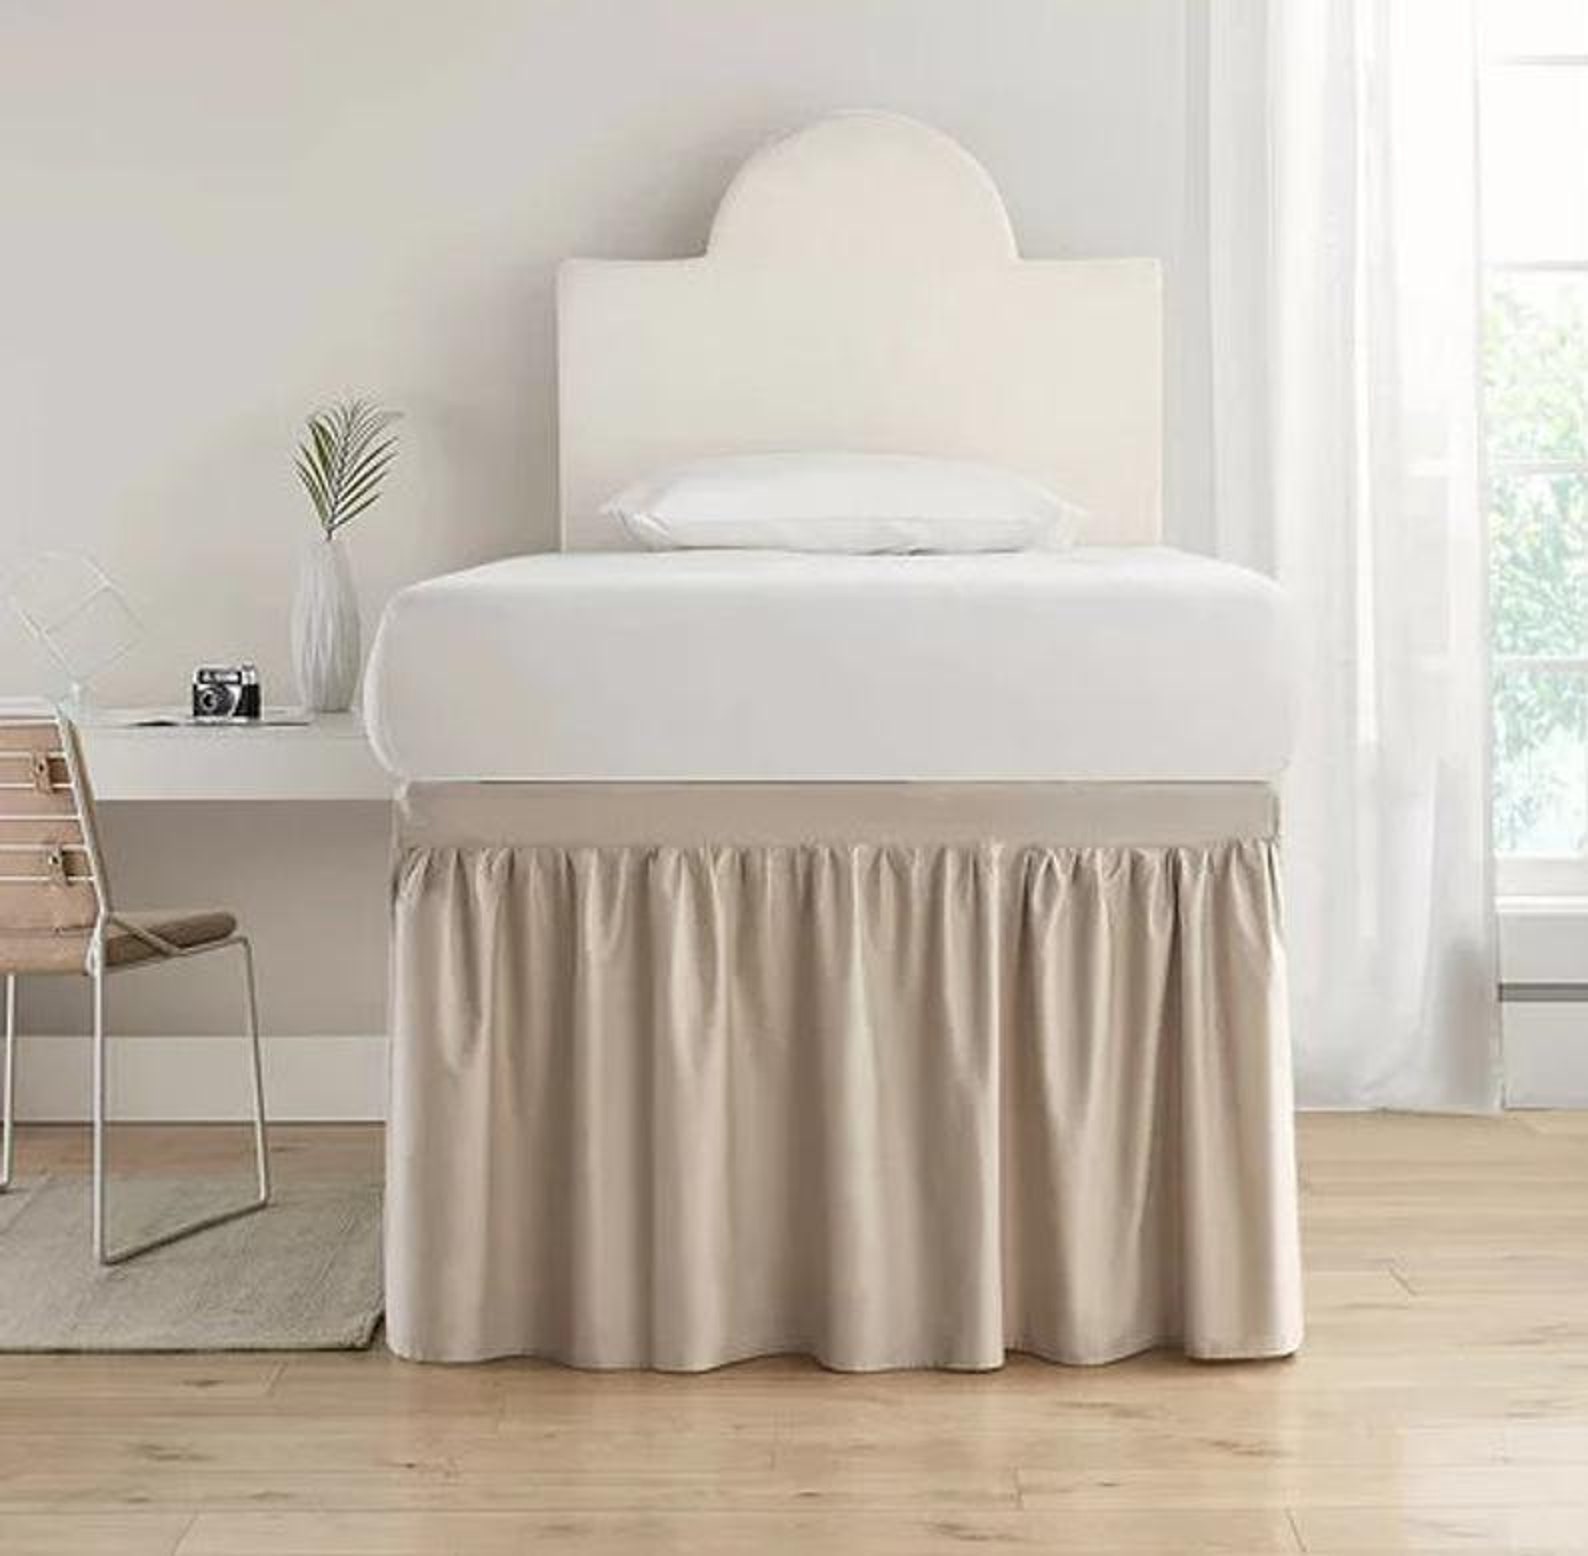 Dorm Sized Cotton Bed Skirt 39x80 Twin XL in Drop - Etsy